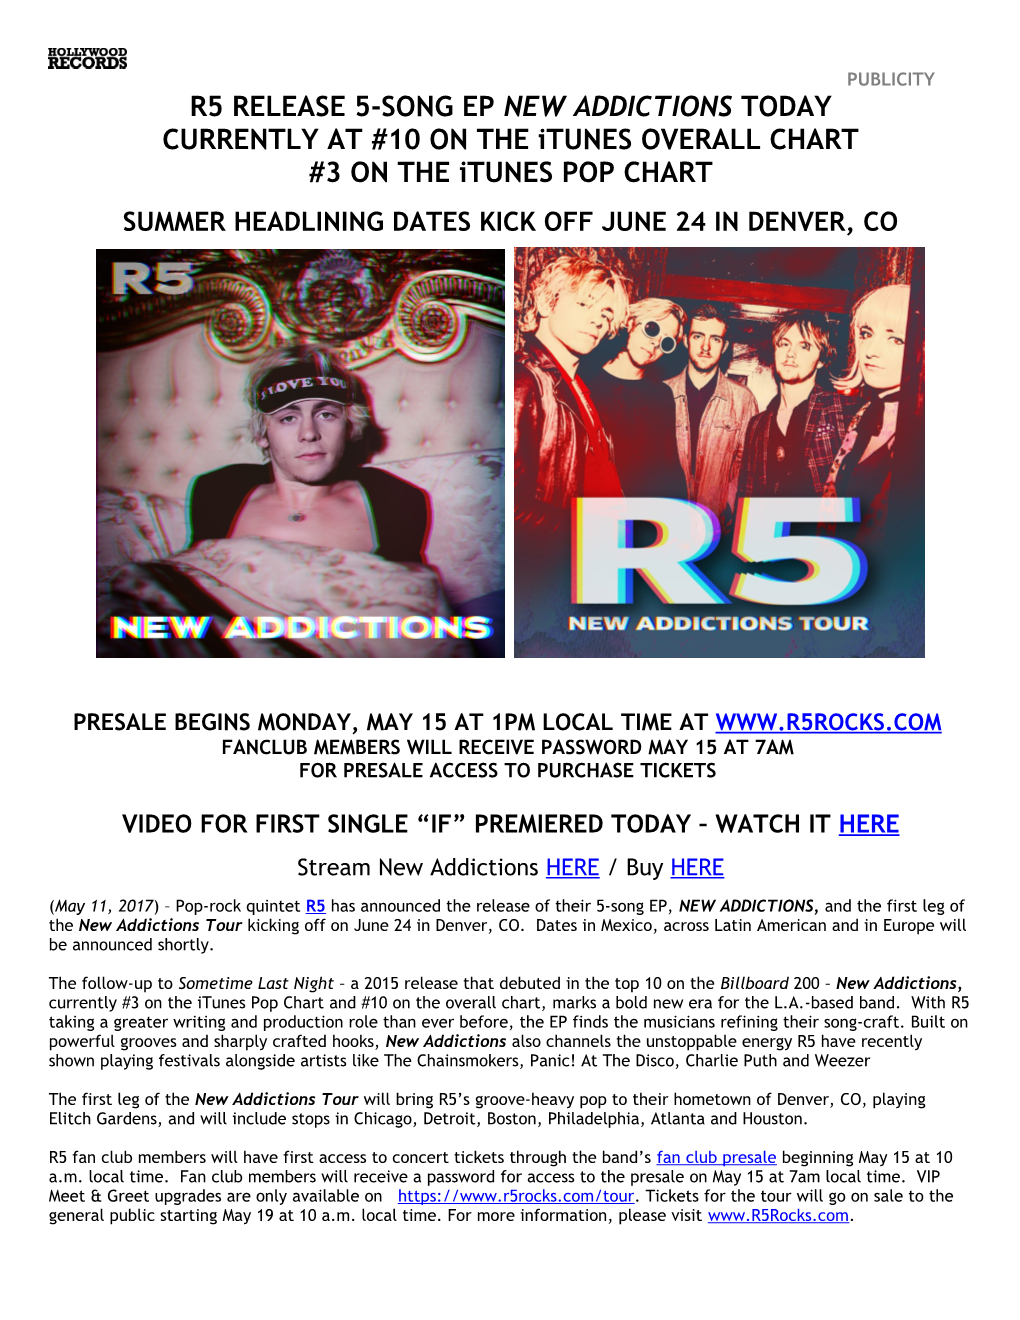 R5 Release 5-Song Ep New Addictionstoday